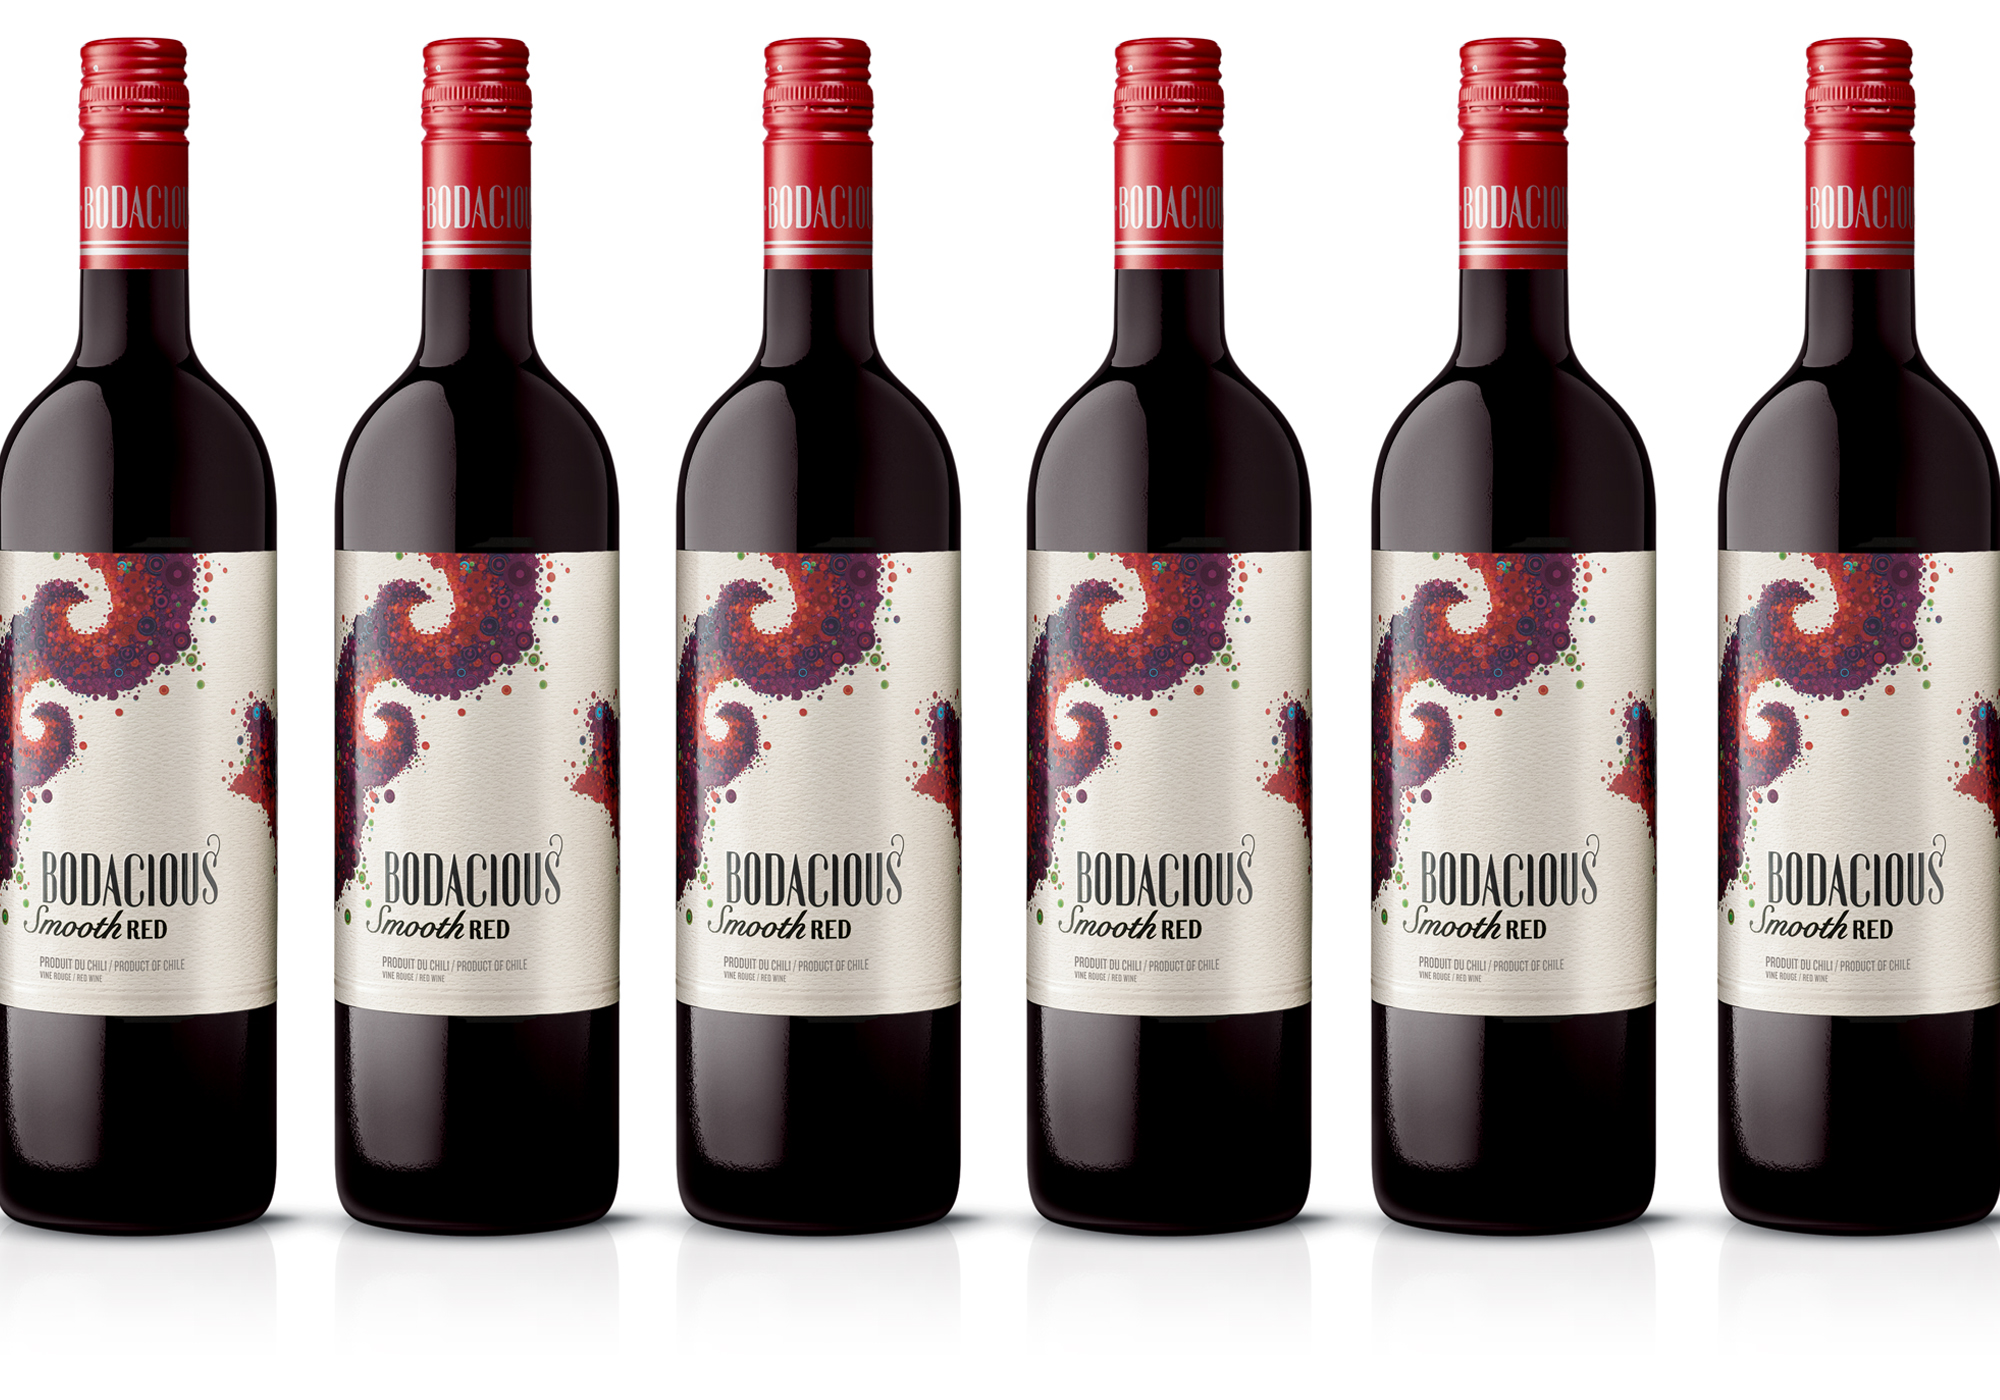 Bodacious Wines Label Design | Dossier Creative | Boldly Filling the new Product Pipeline